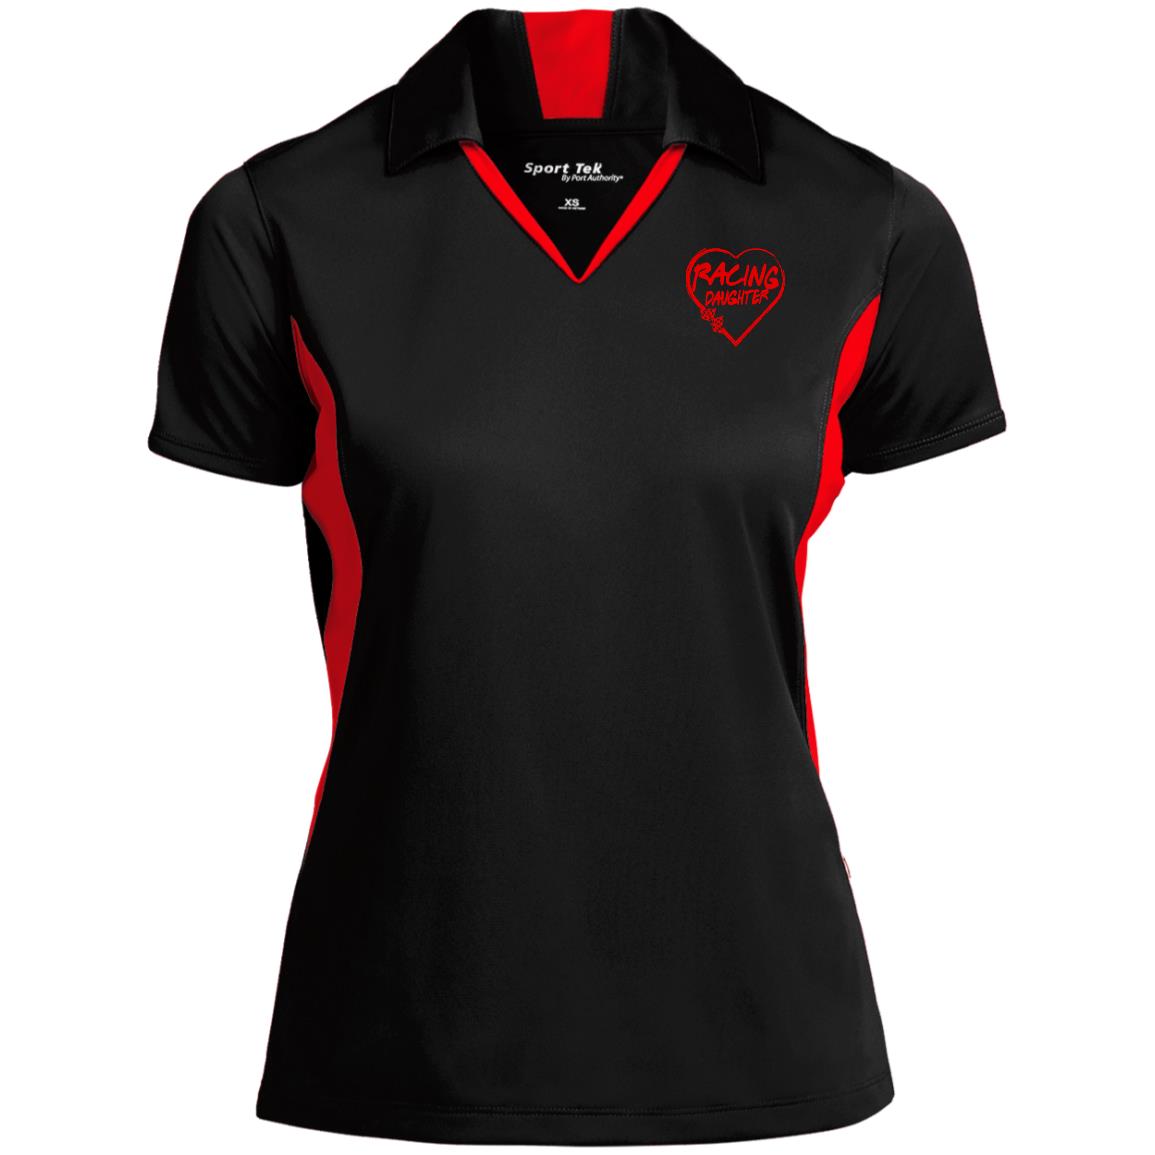 Racing Daughter Heart Ladies' Colorblock Performance Polo